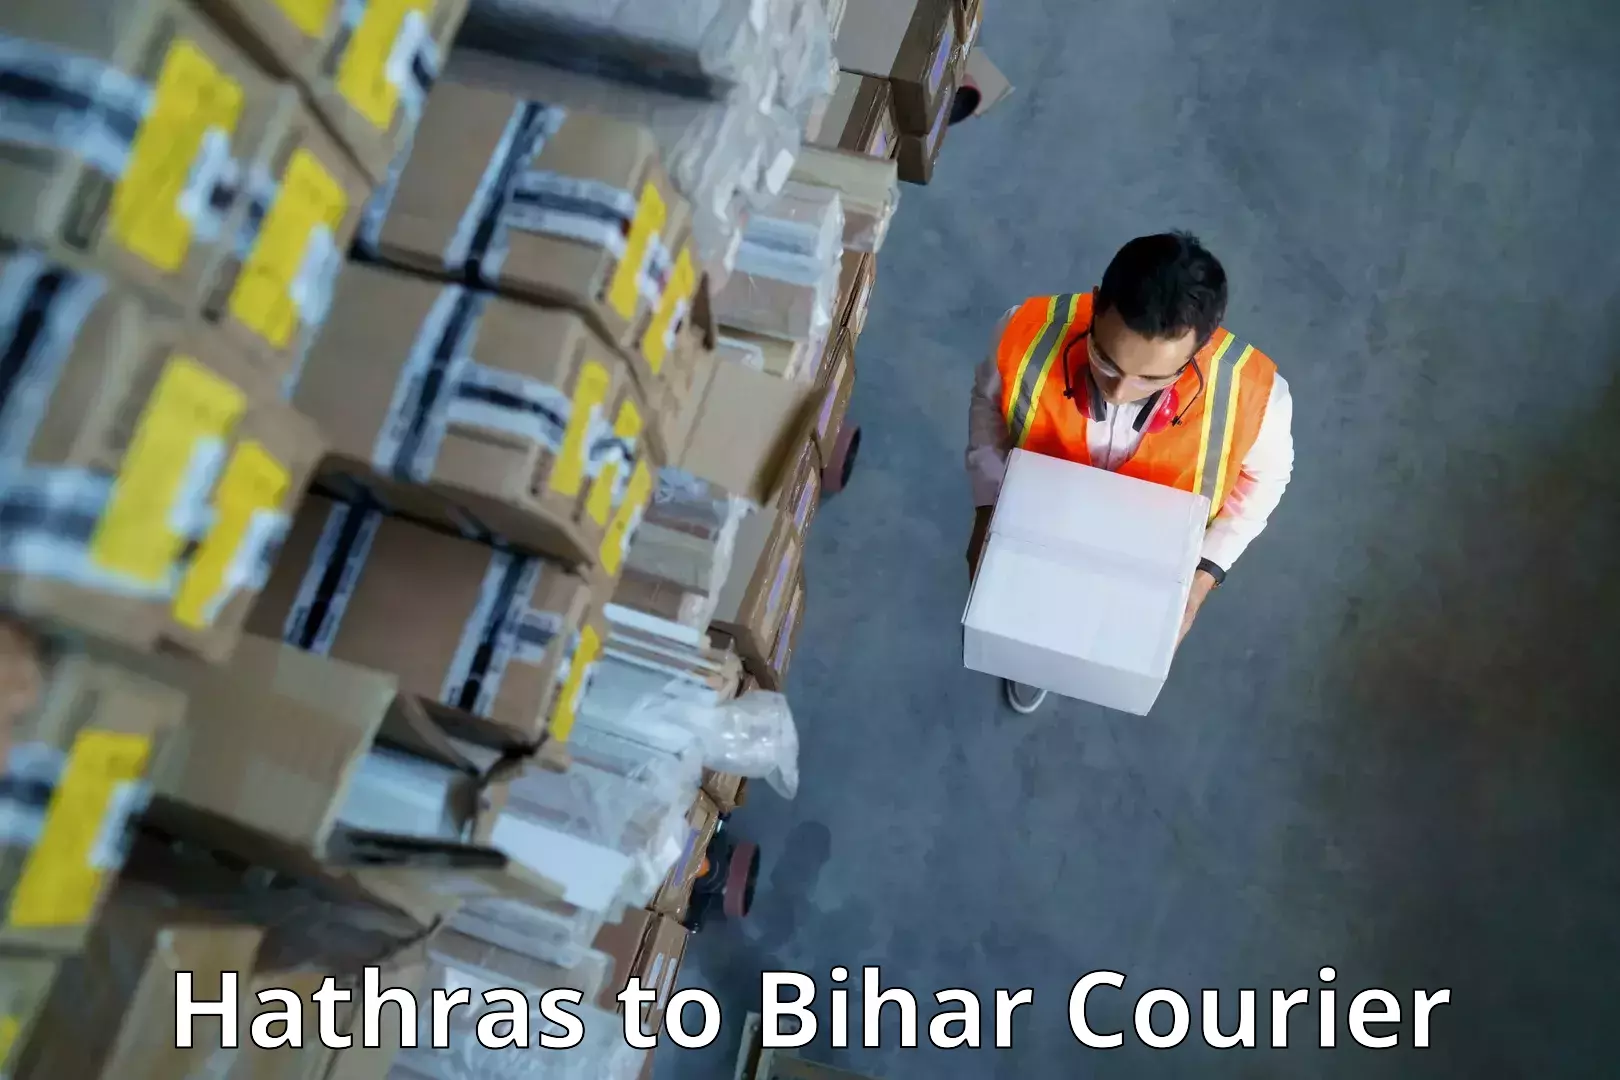 Subscription-based courier Hathras to Samastipur